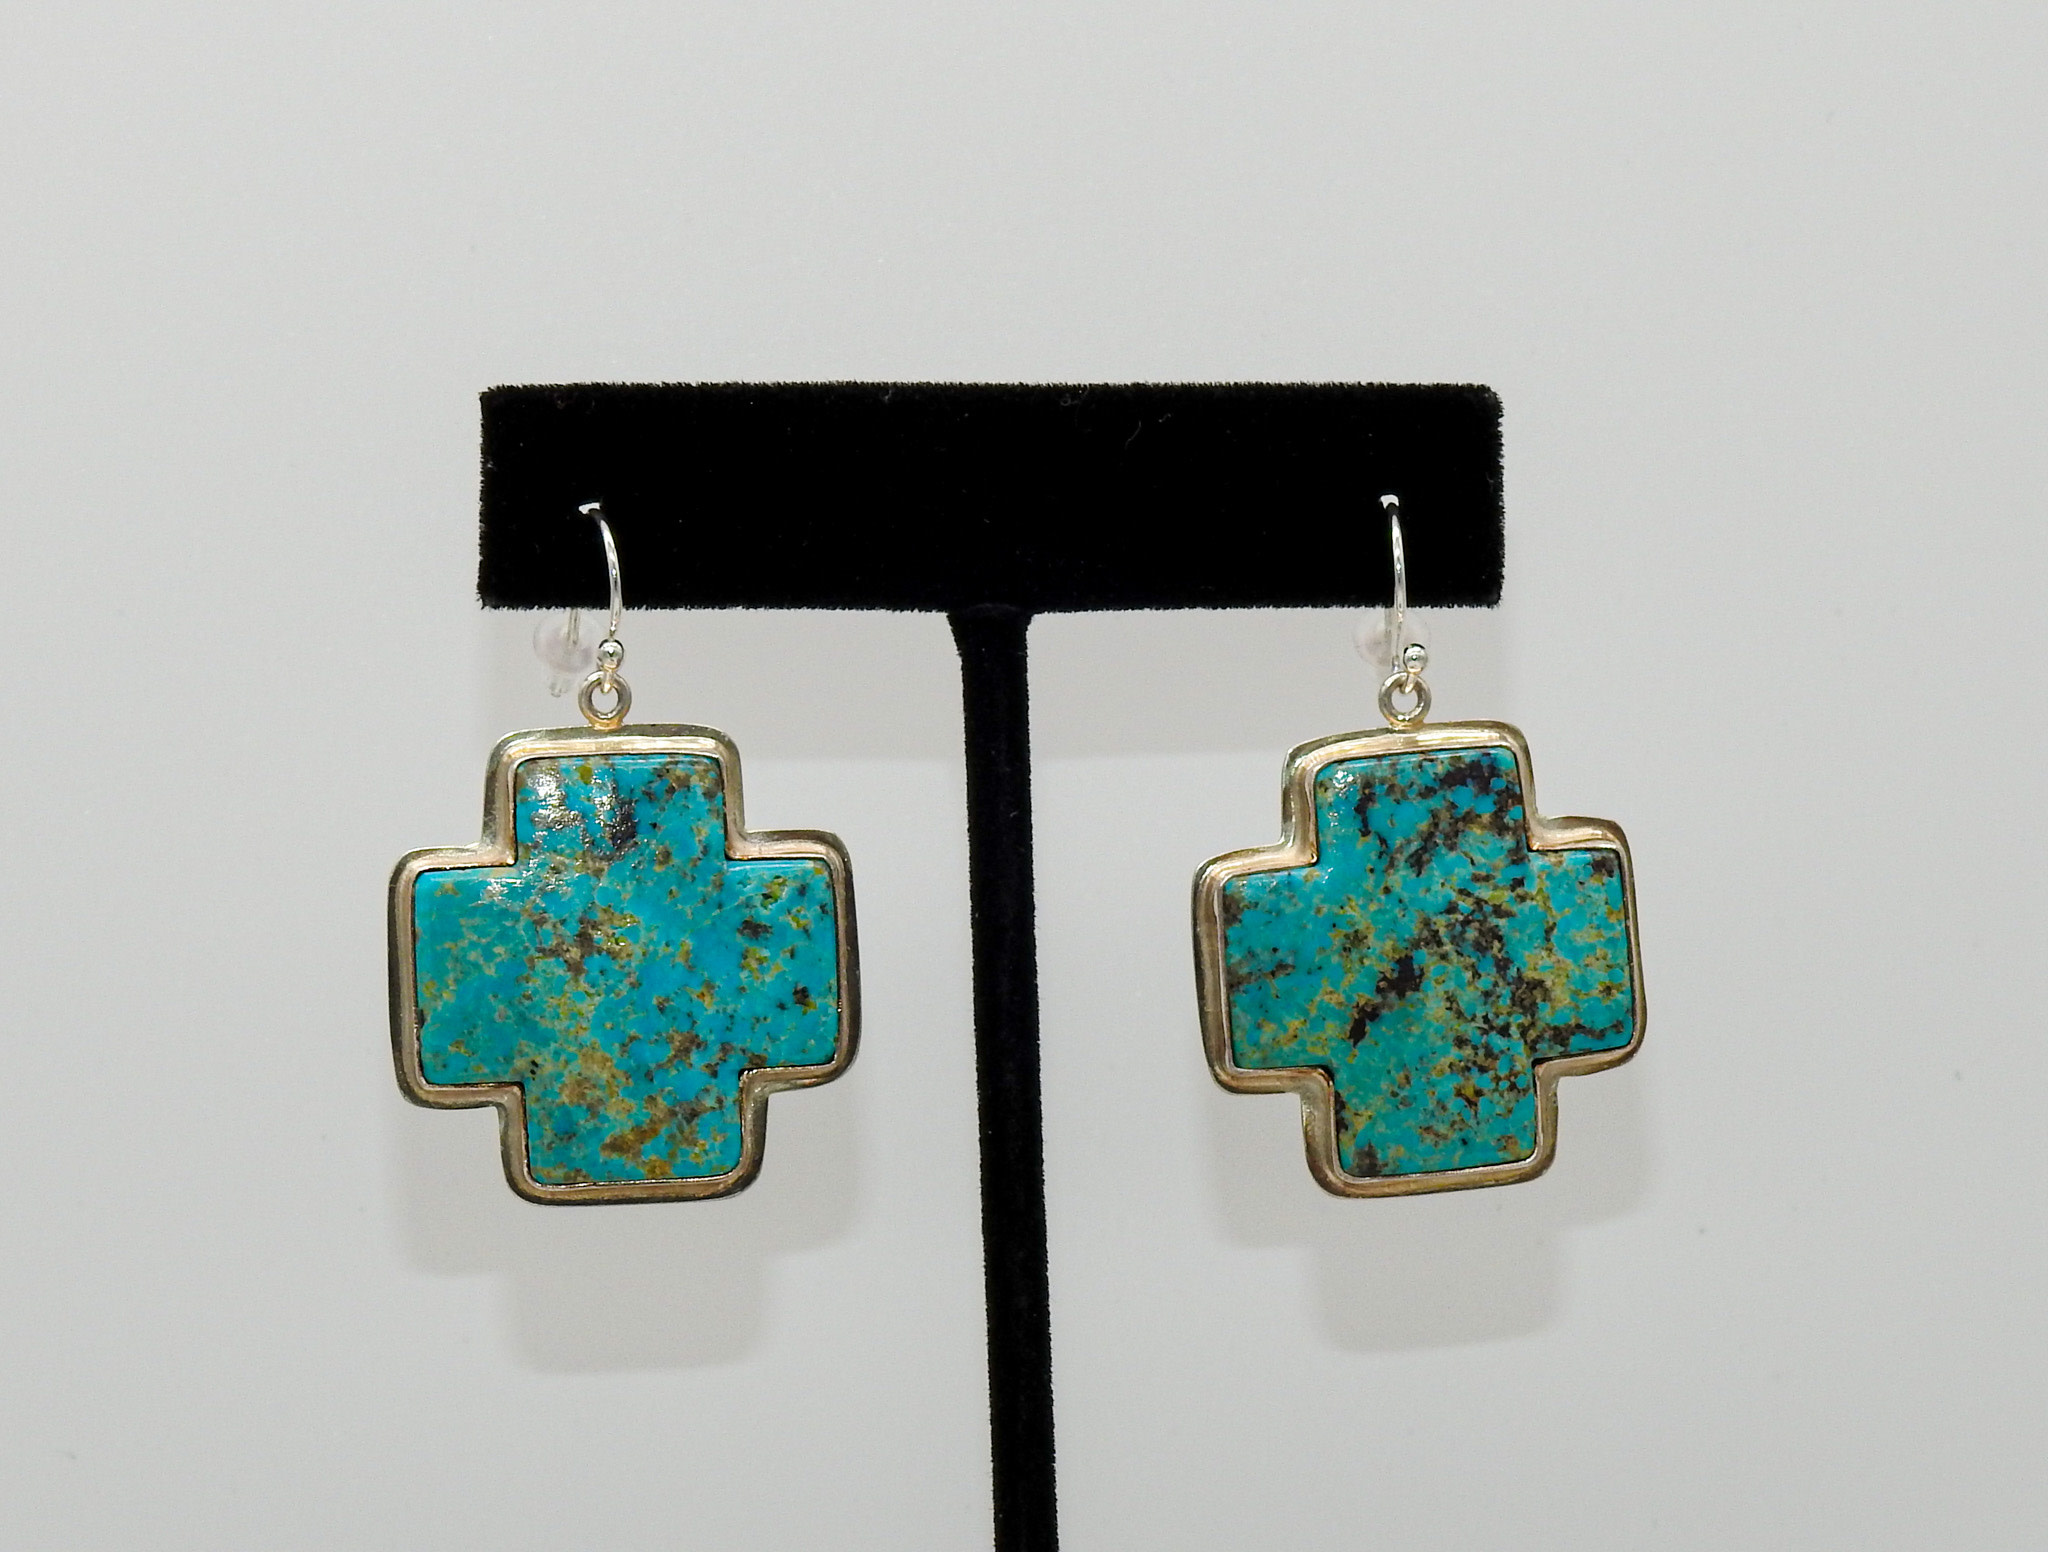 Rox N Stones SS Lg. Turq. Four Directions Earrings on wires